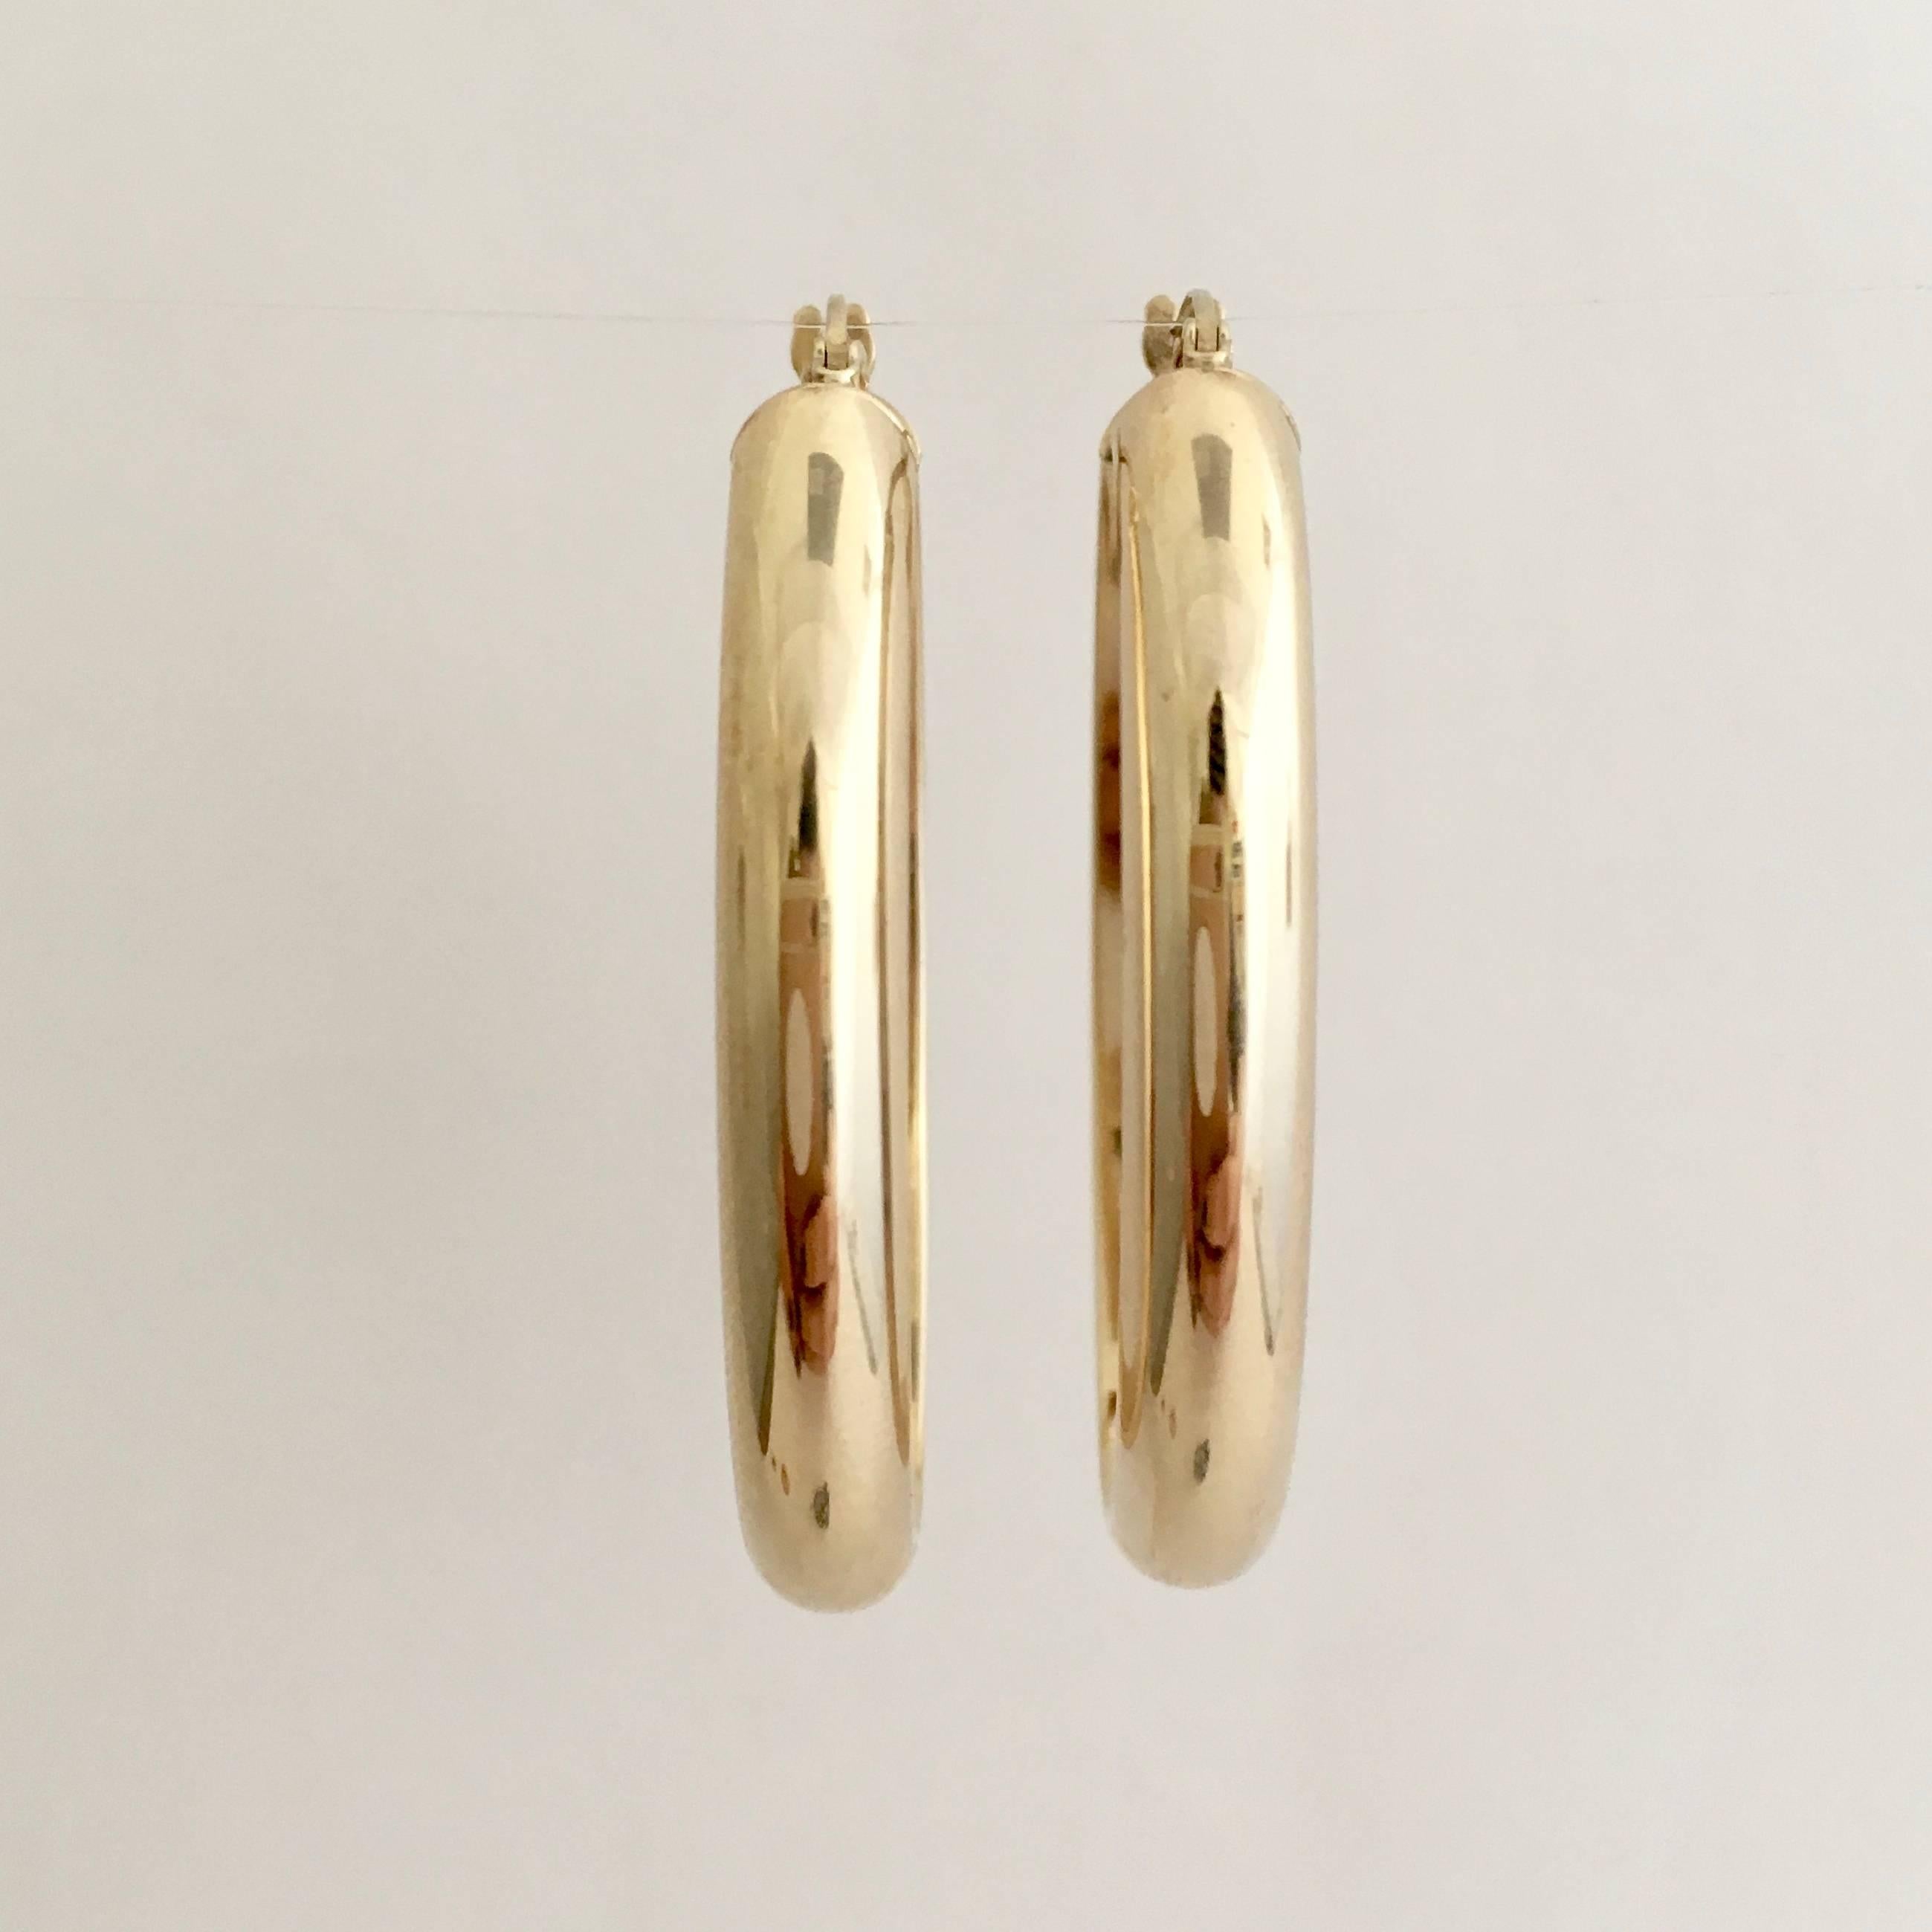 Contemporary Gold Hoops Vintage Jewelry Large Elongated Oval Statement Hoop Earrings